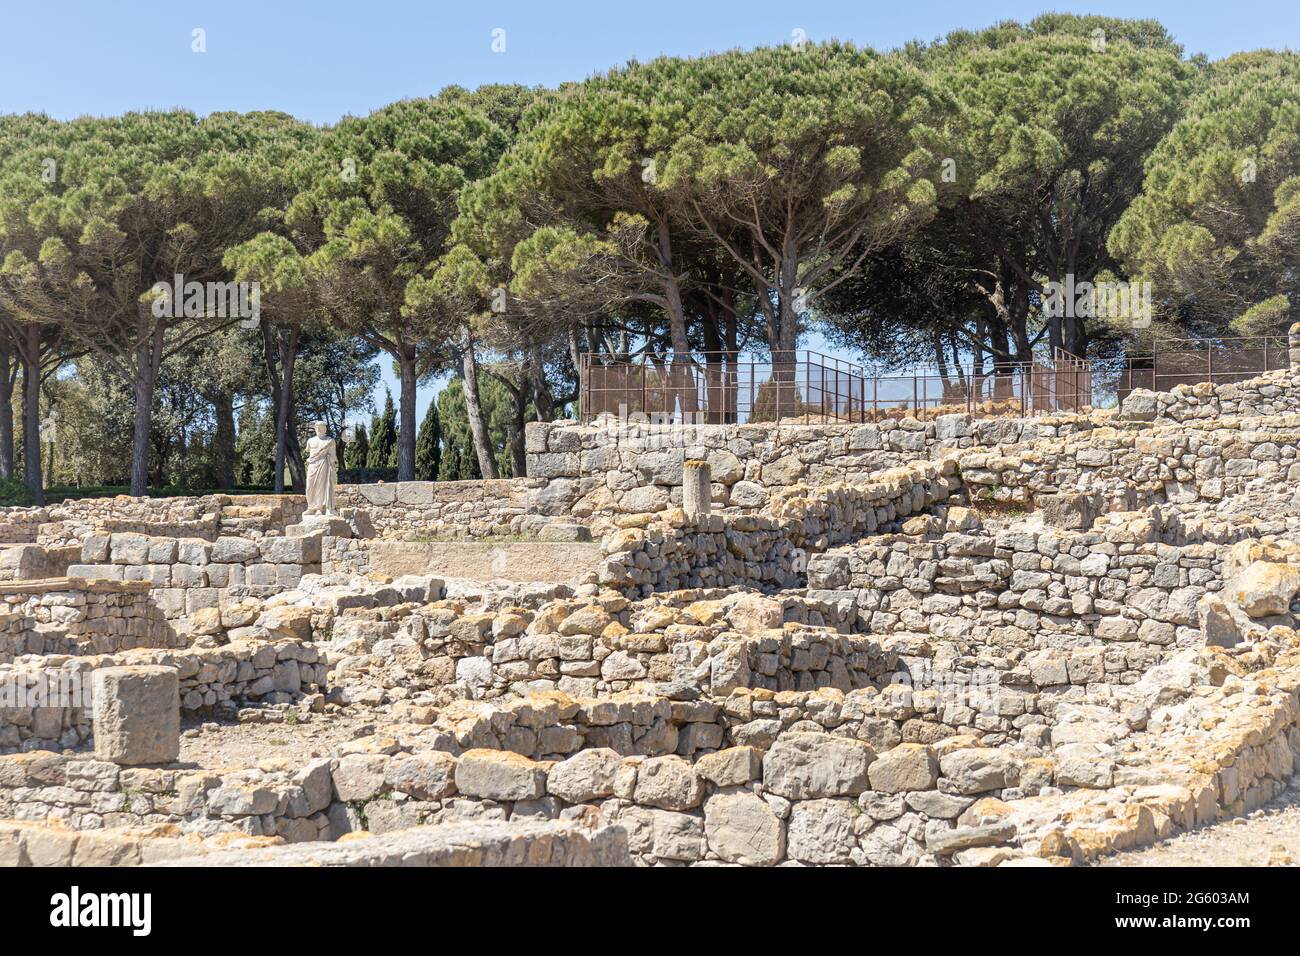 Archaeological Remains of ancient city Empuries. Remains of a Greek rampart. Archaeology Museum of Catalonia, Spain. Stock Photo